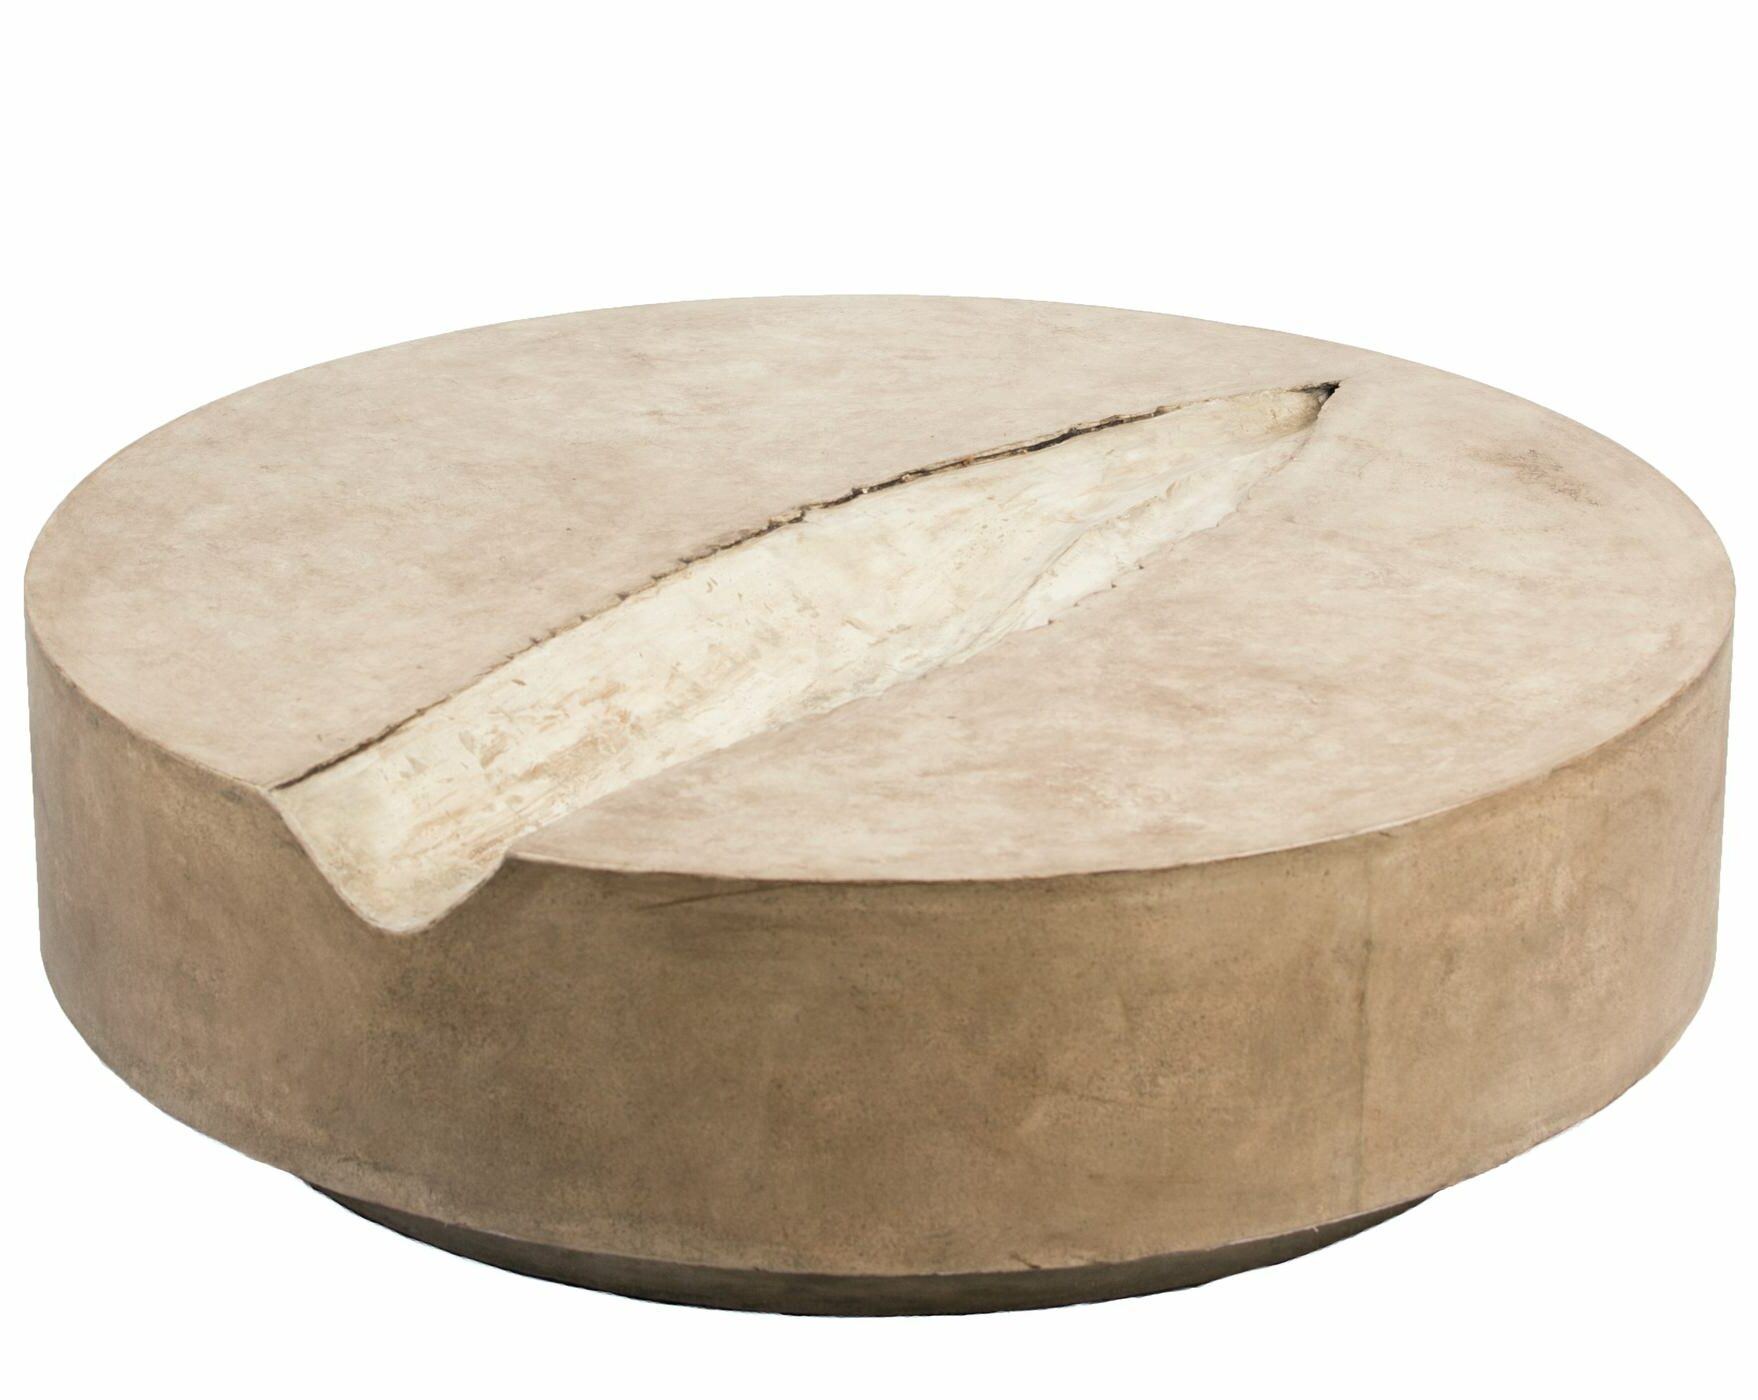 round brown concrete coffee table with thorny agave blade embedded in middle